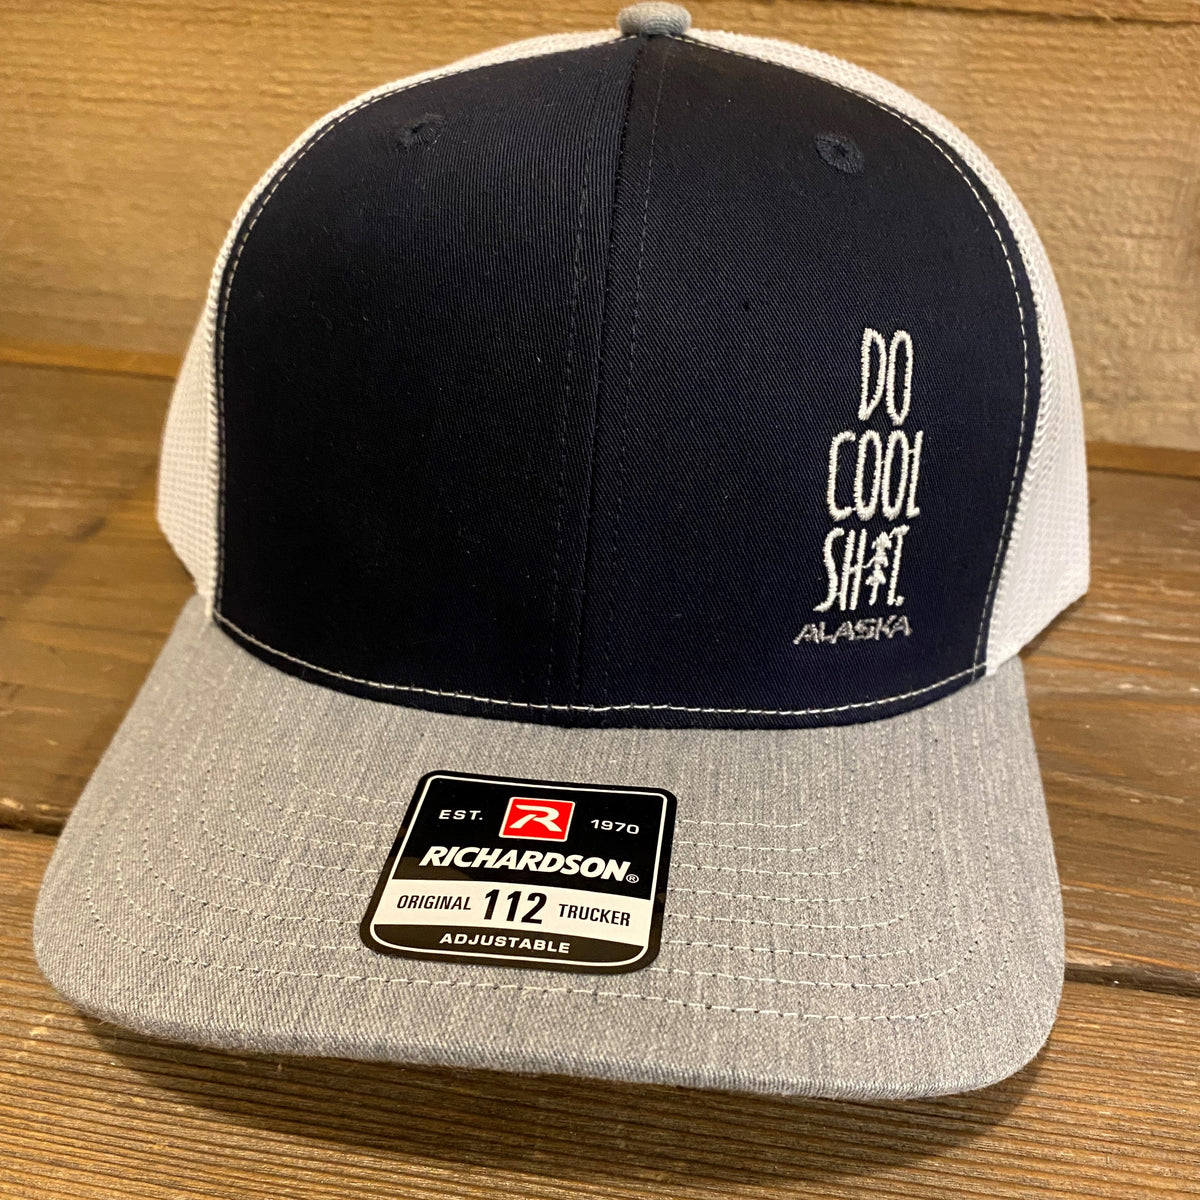 Explore Our Exciting Line of Do Cool Sh*t Baseball Hat Bumwraps